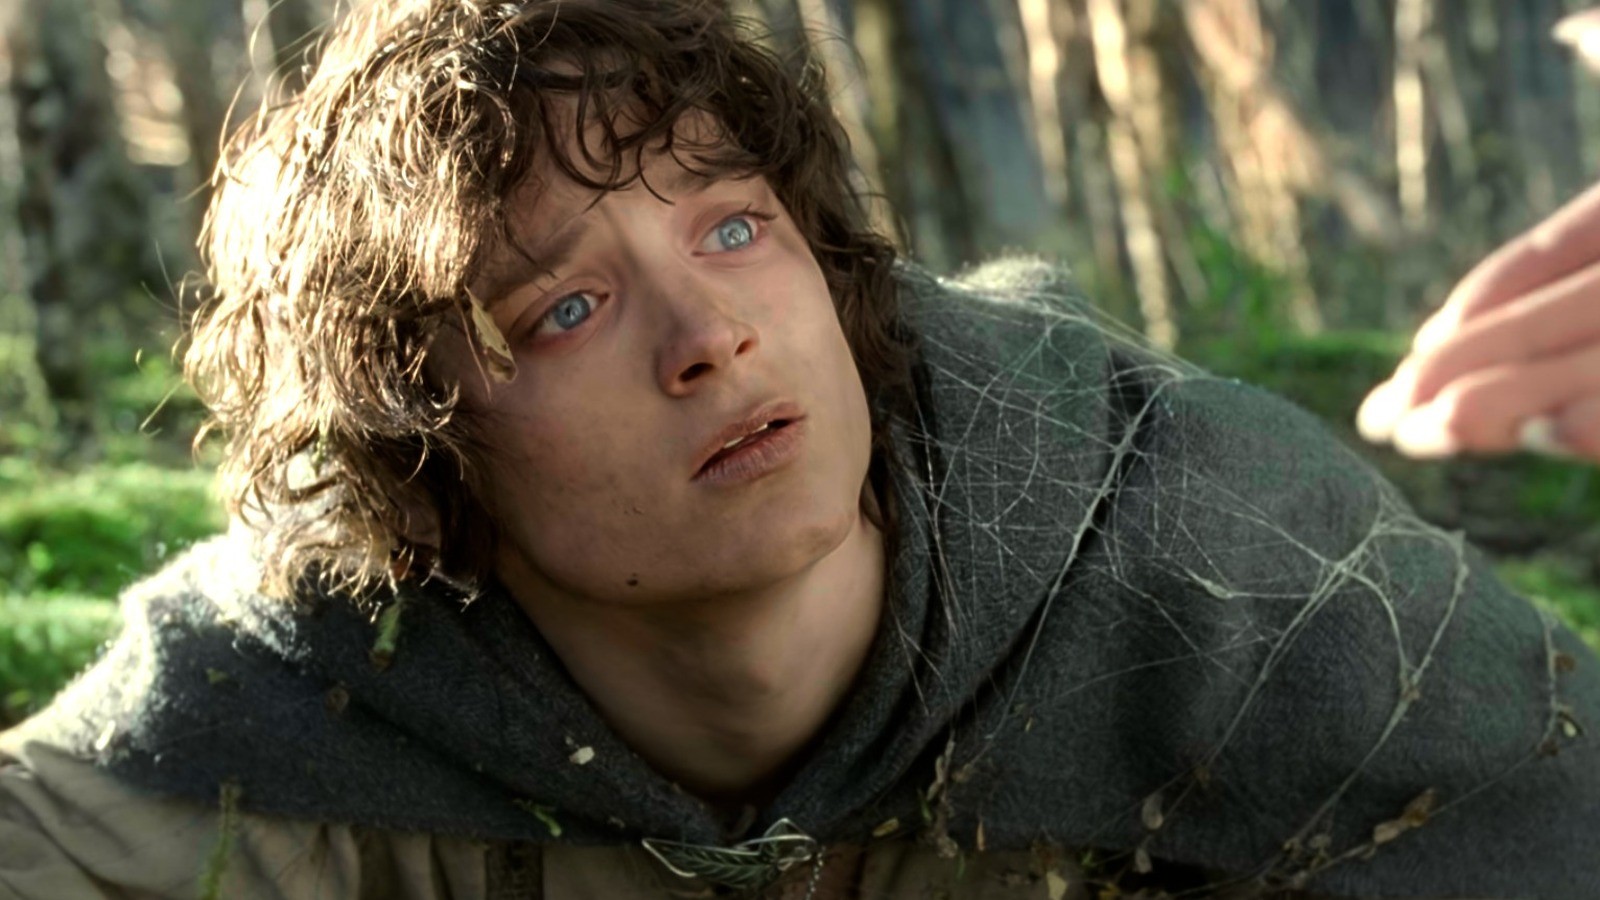 Elijah Wood in a still from The Lord Of The Rings Franchise